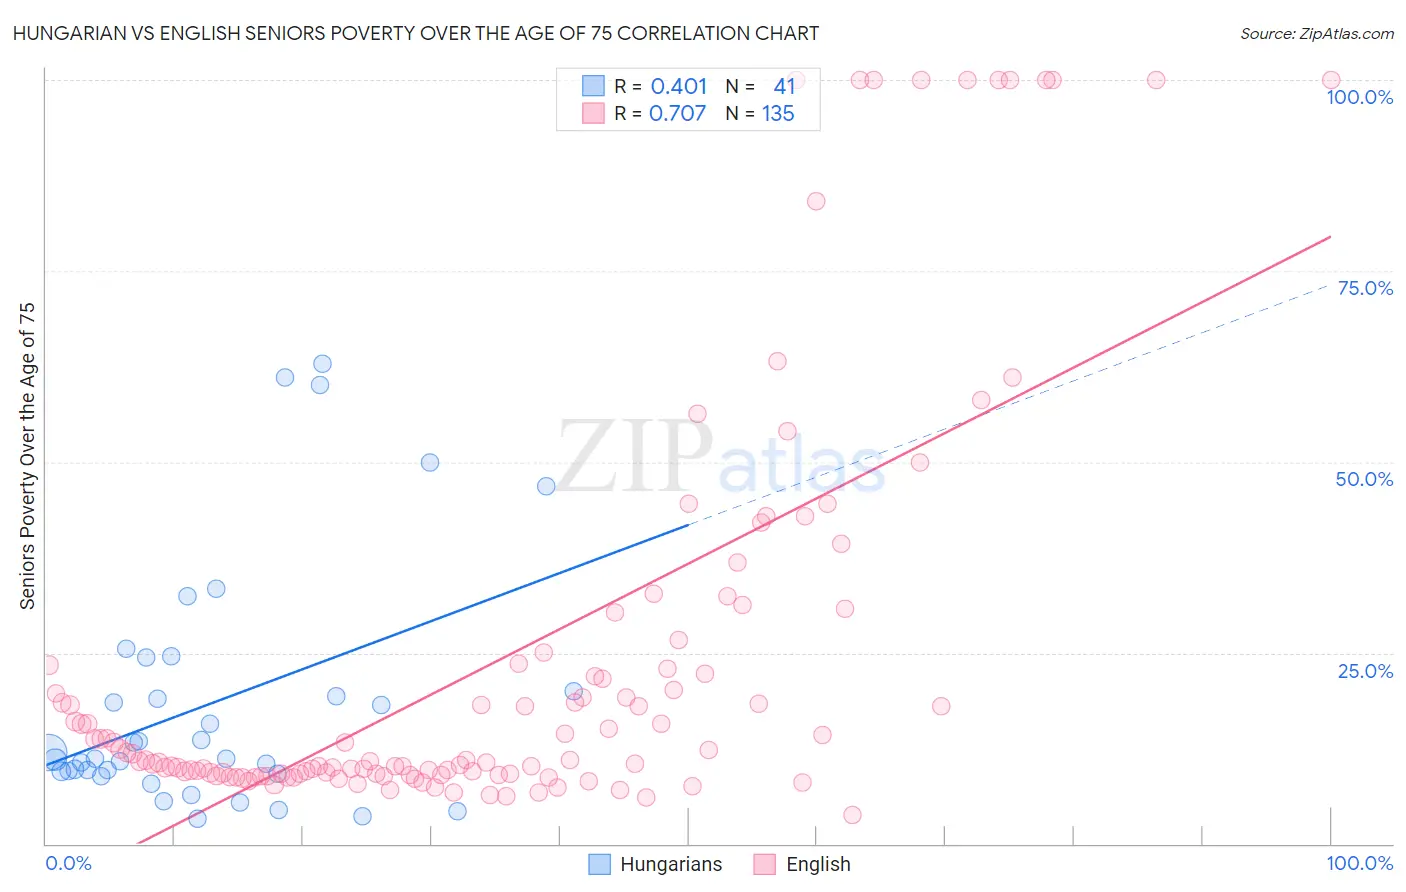 Hungarian vs English Seniors Poverty Over the Age of 75